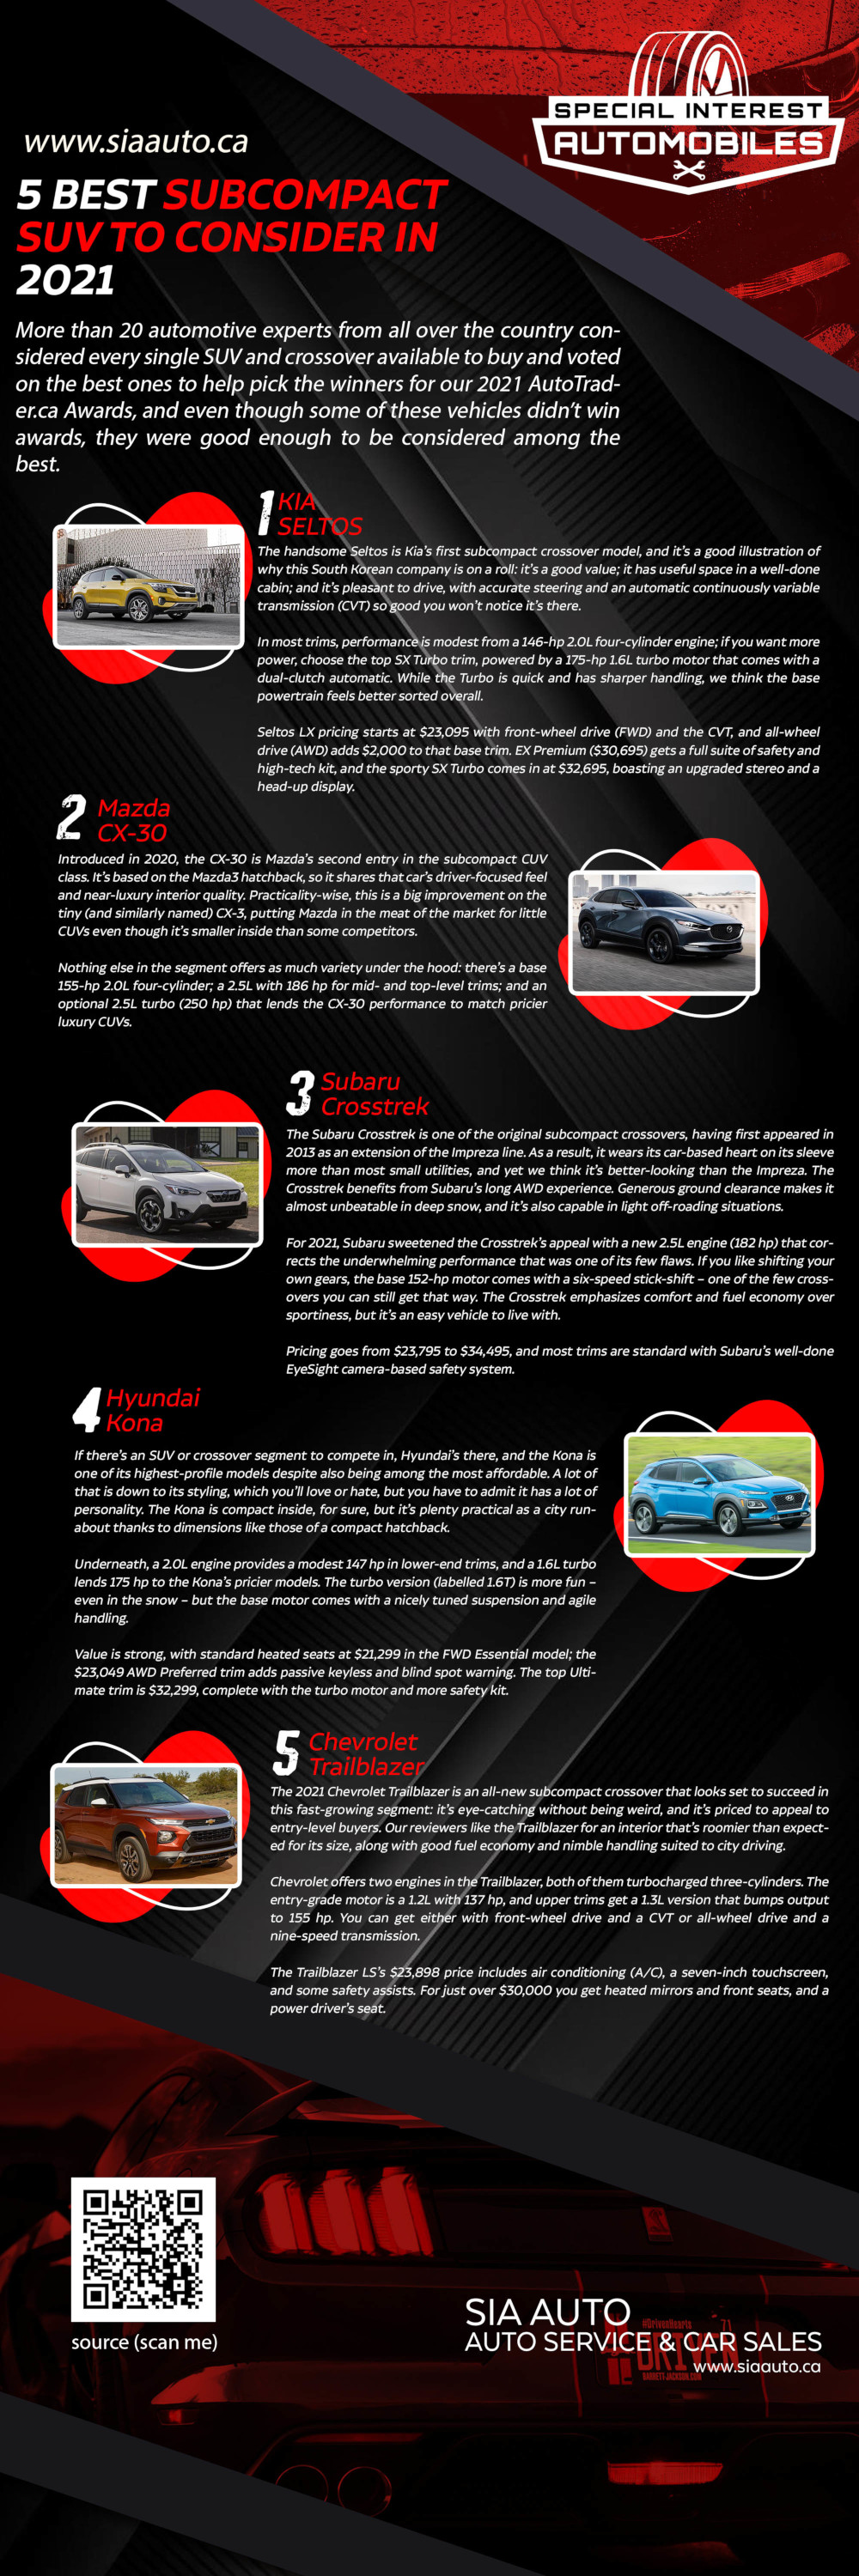 2021 5 Best Subcompact SUV to consider Auto Sales Infographic